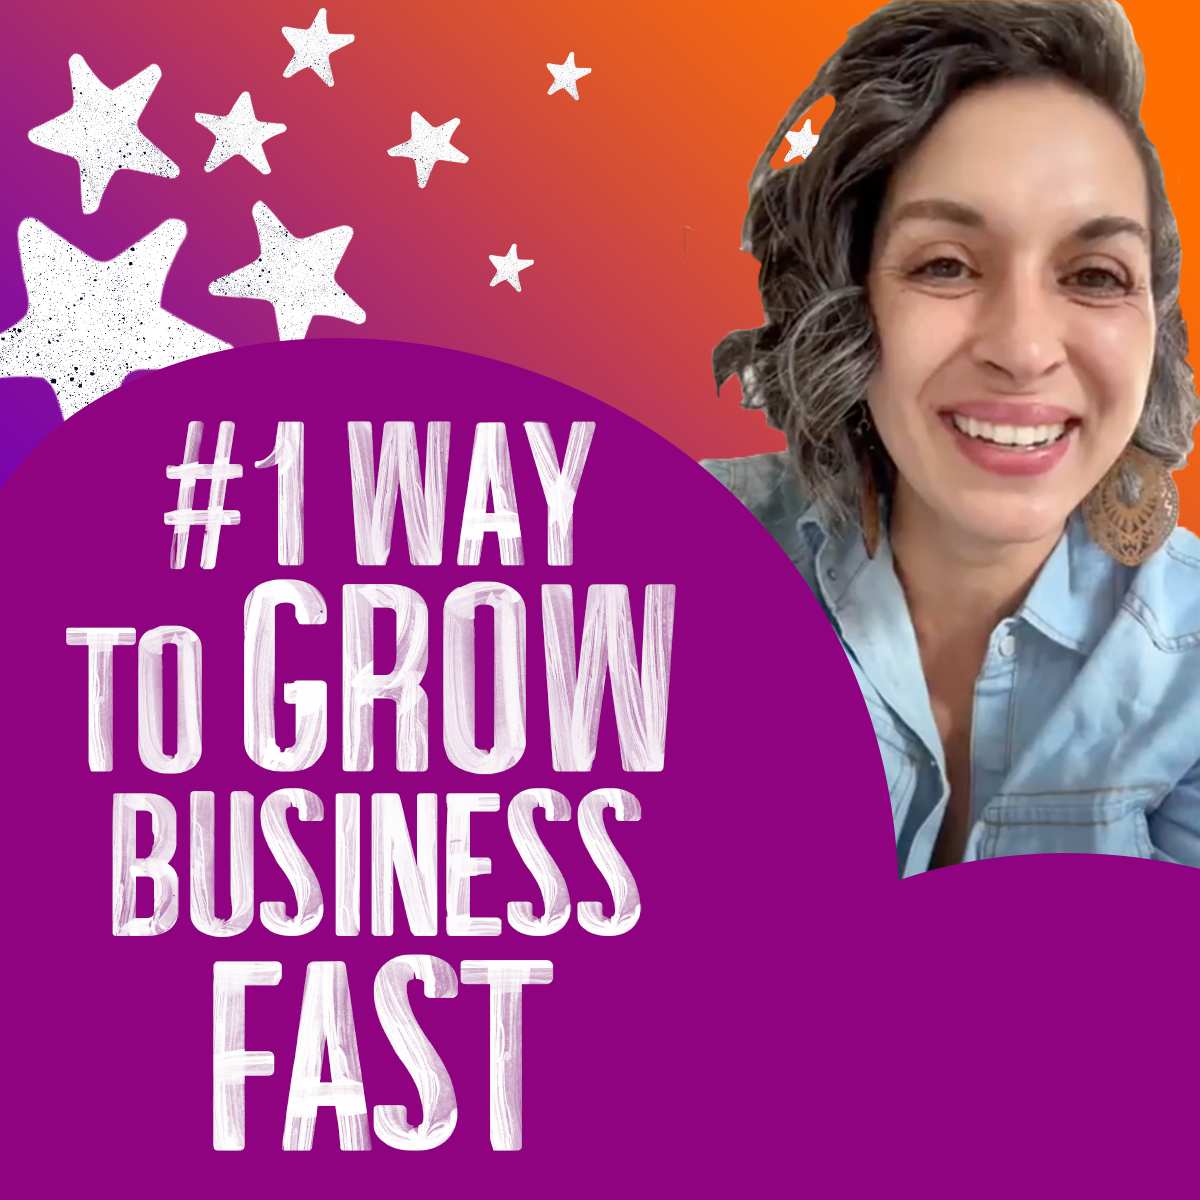 #1 Way to Grow Business Fast